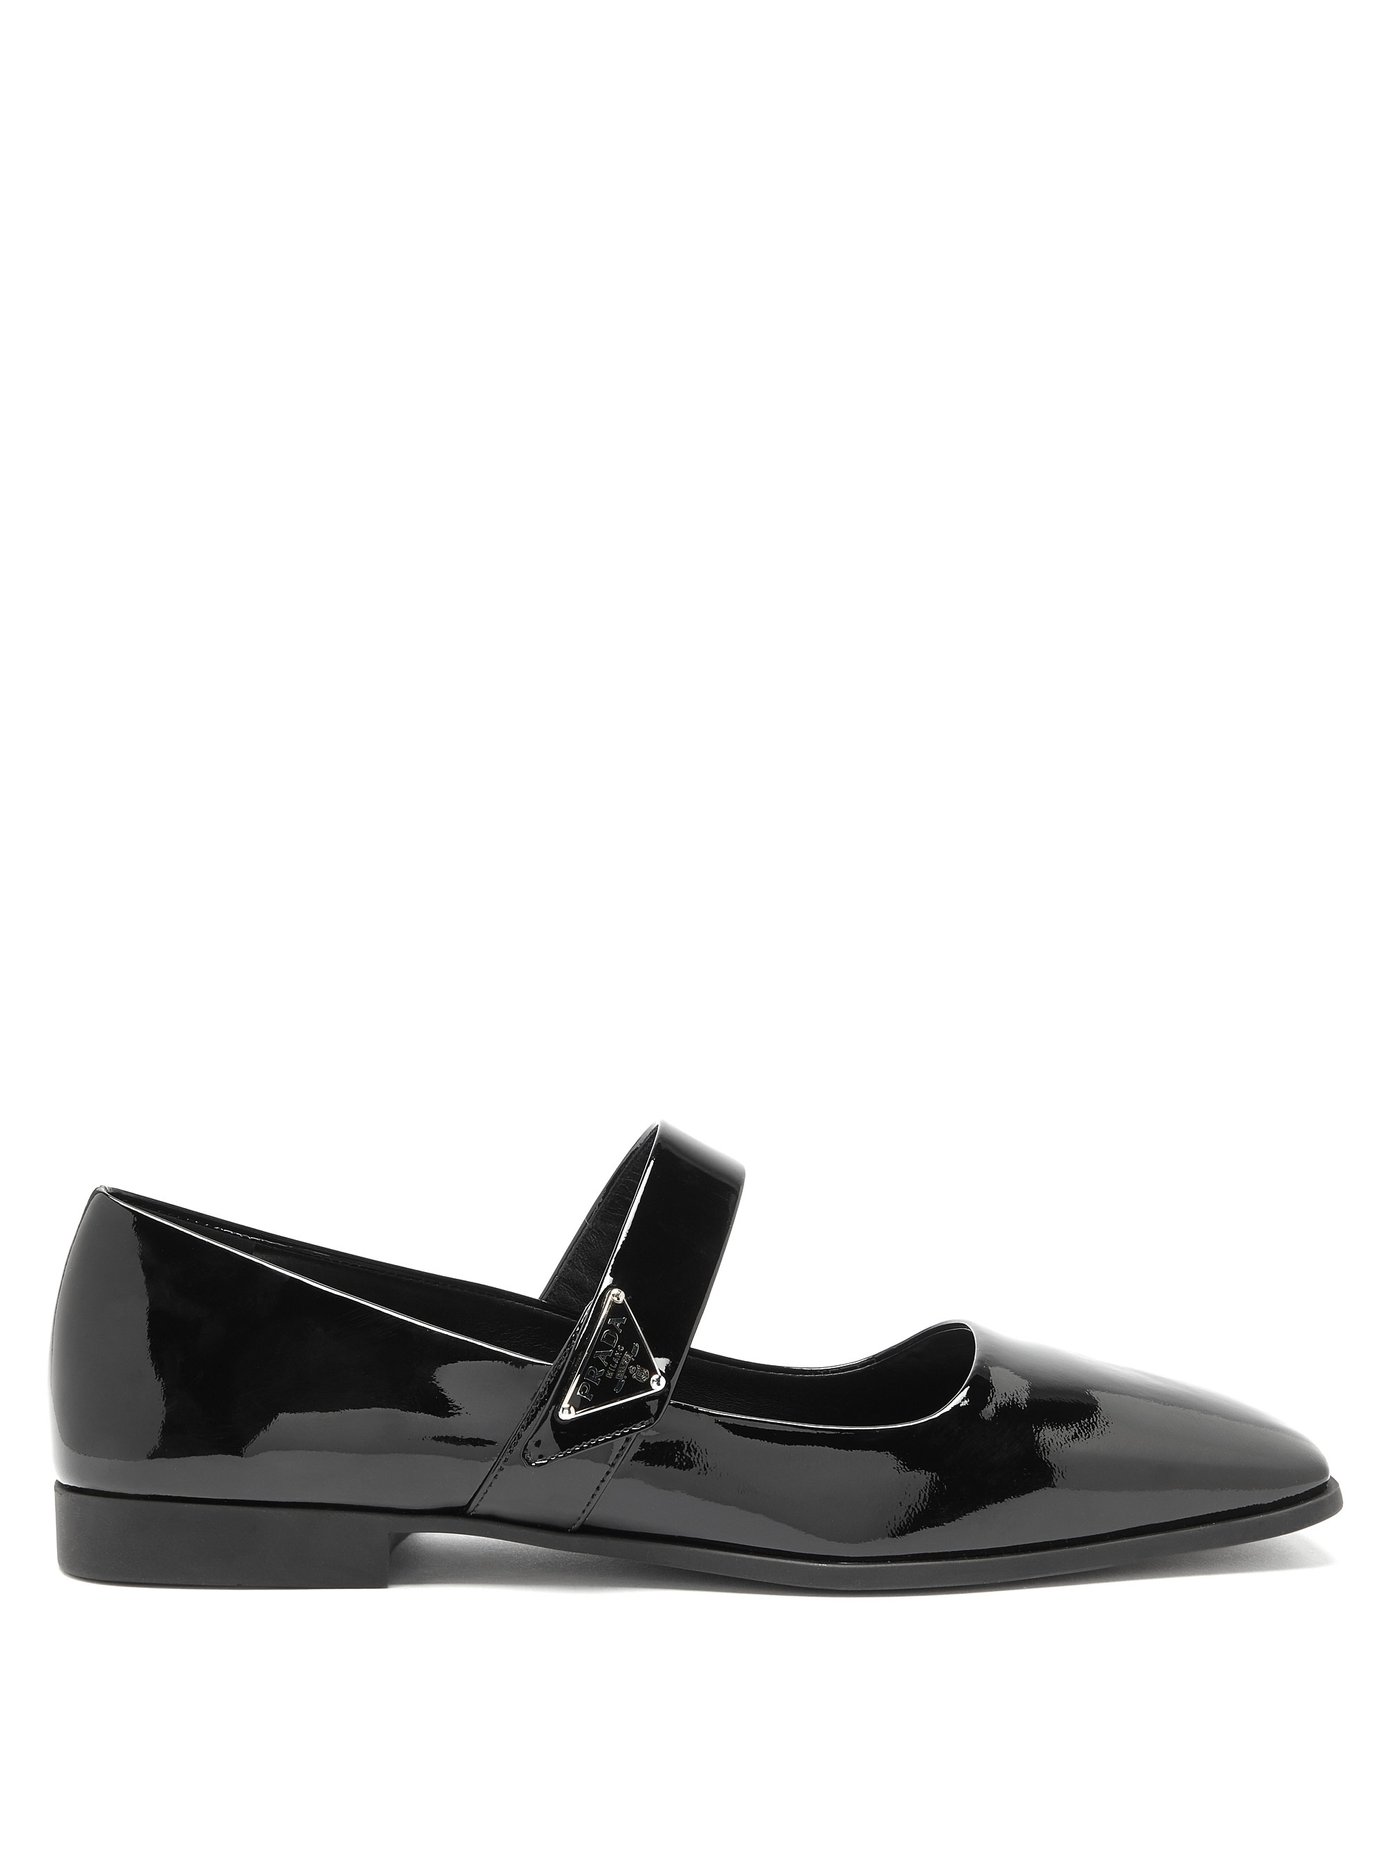 Mary-Jane square-toe patent leather 